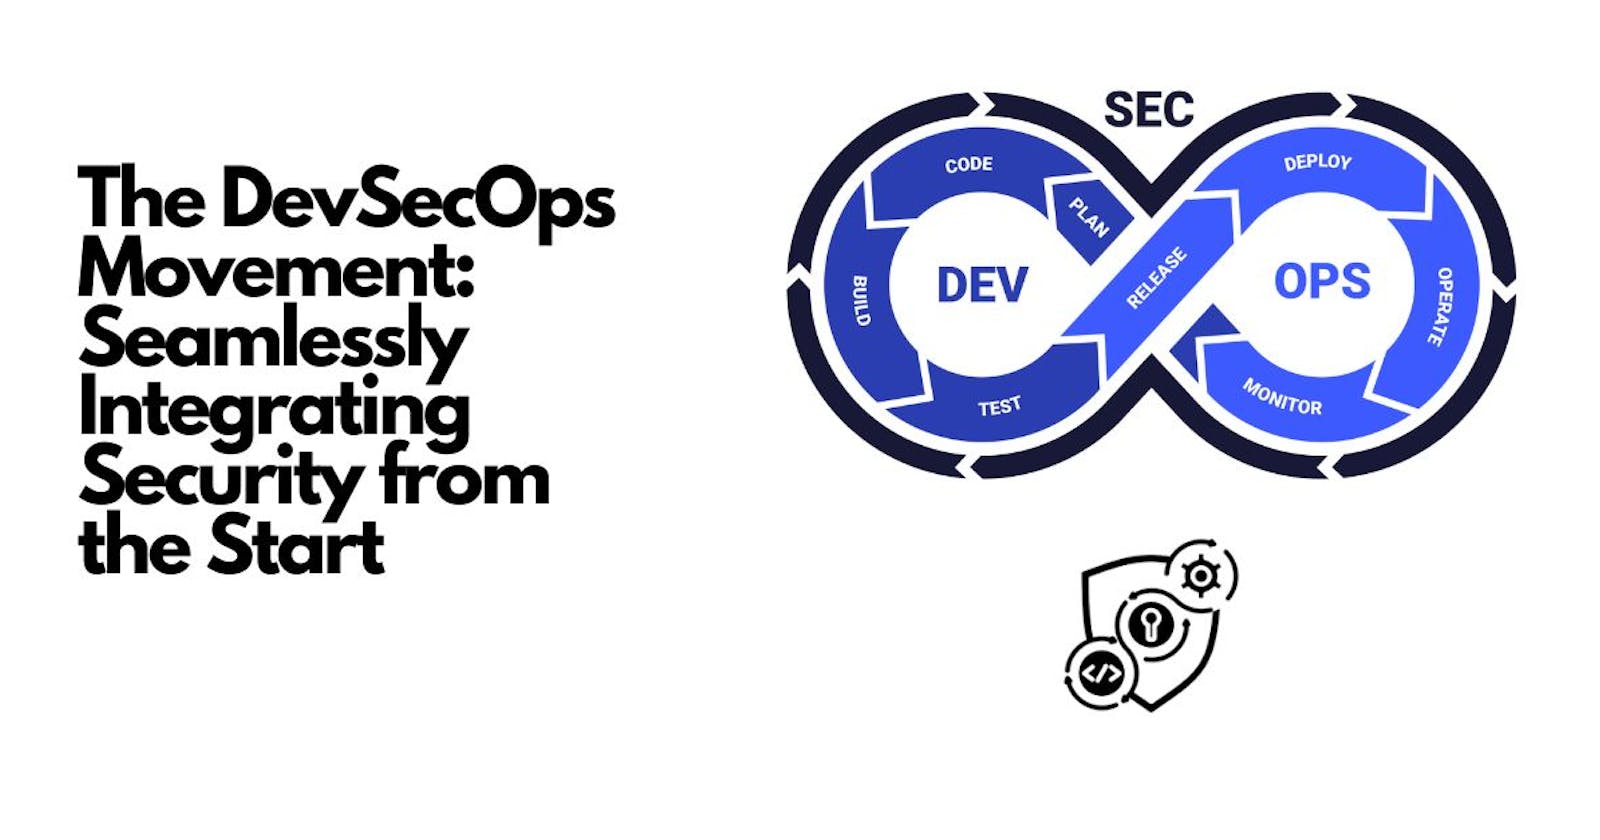 The DevSecOps Movement: Seamlessly Integrating Security from the Start